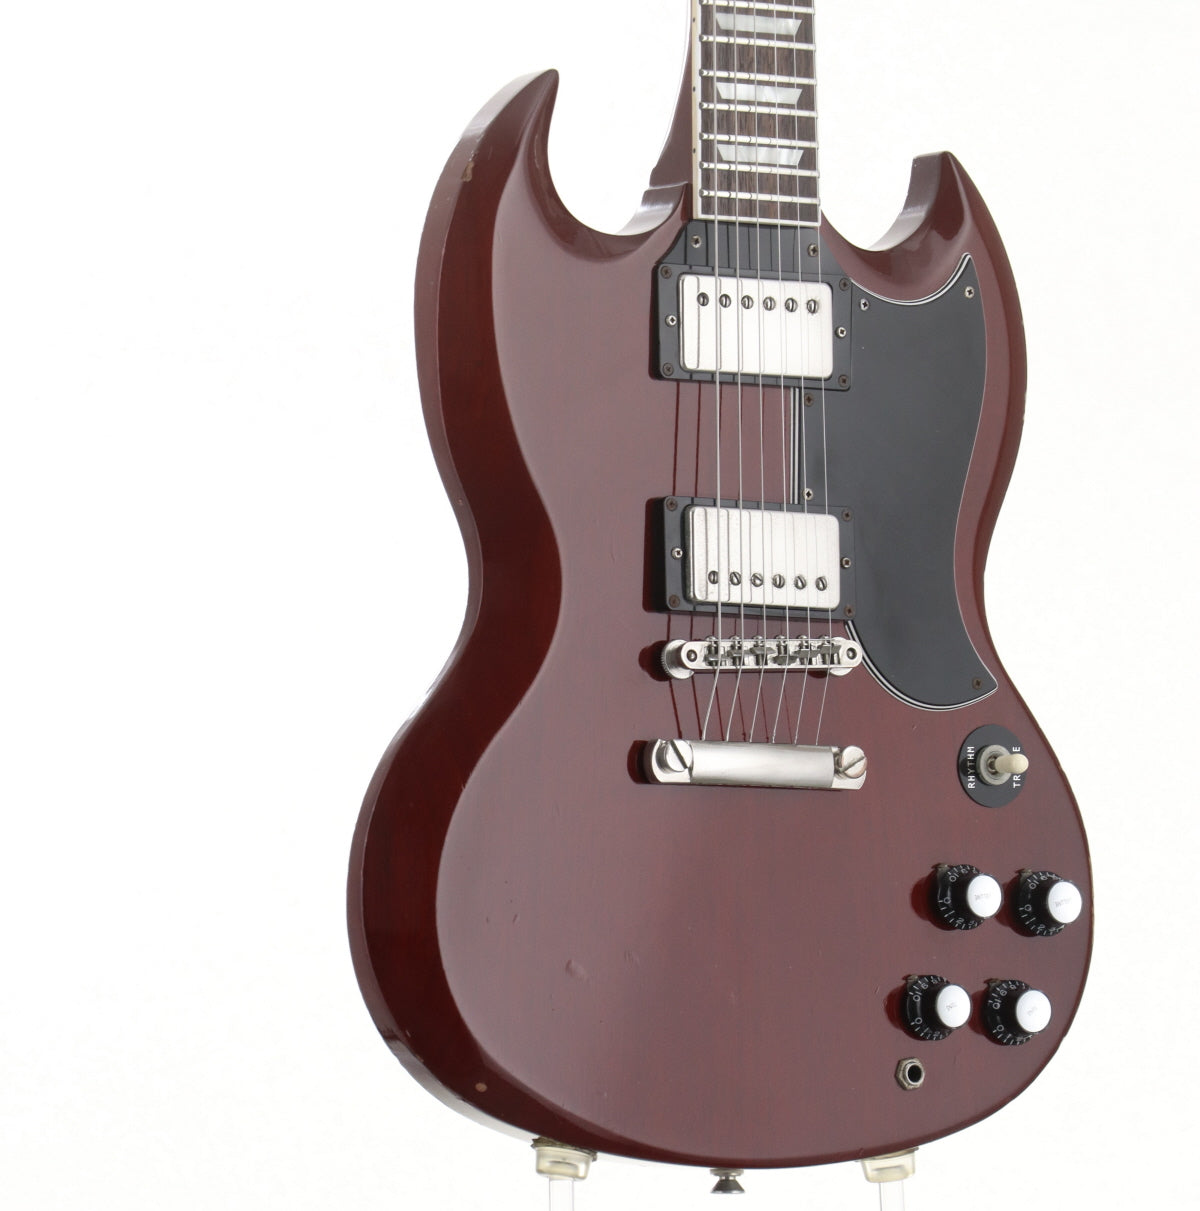 [SN F600484] USED EPIPHONE / 61 SG LQ Made in Japan [10]